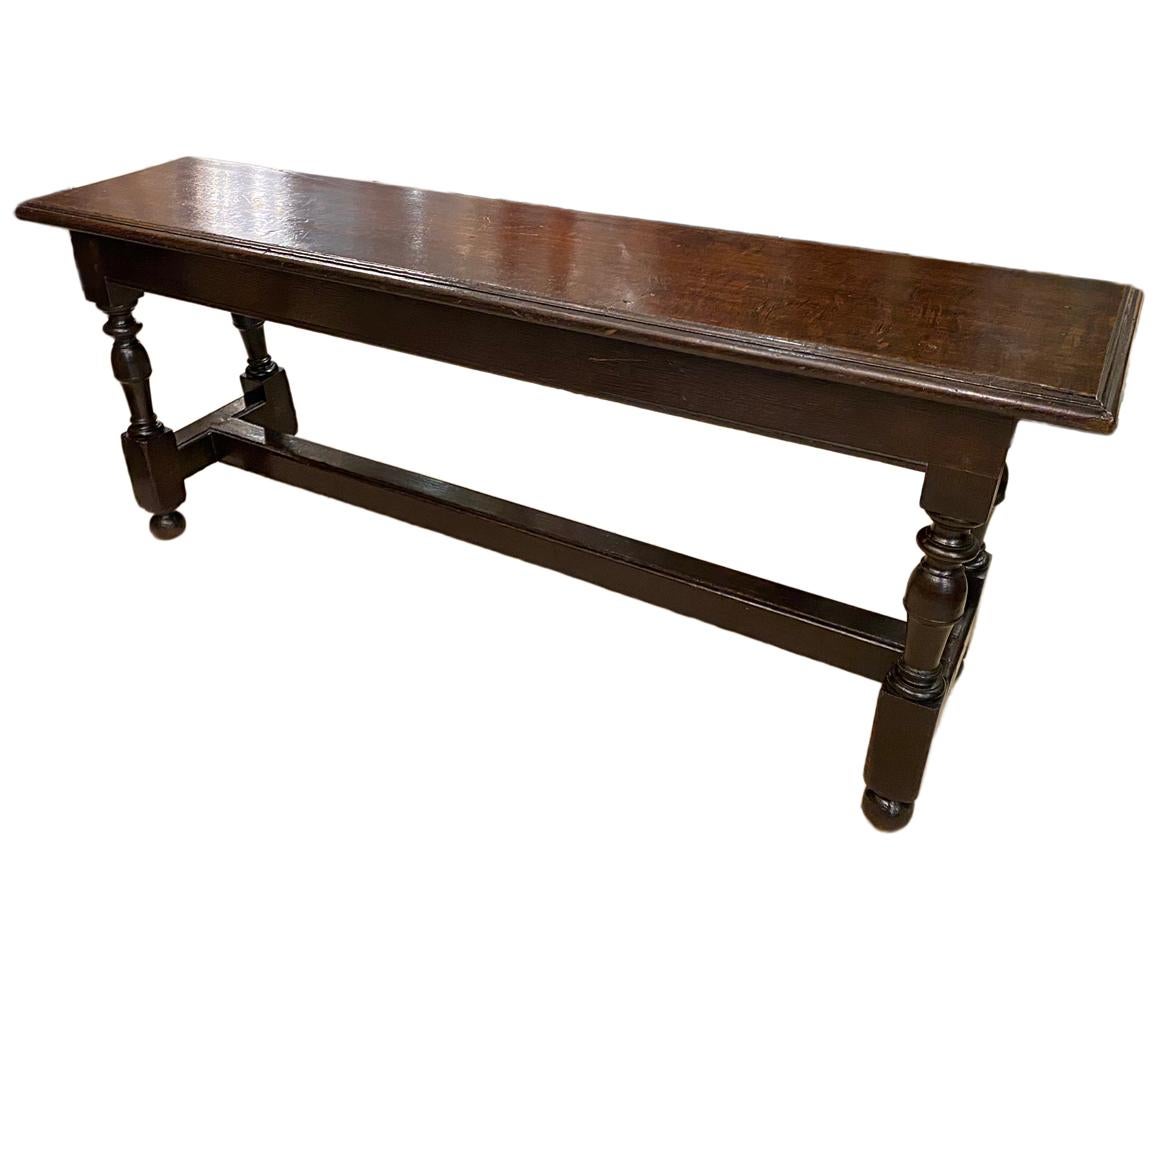 Early 20th Century Antique English Carved Wood Bench